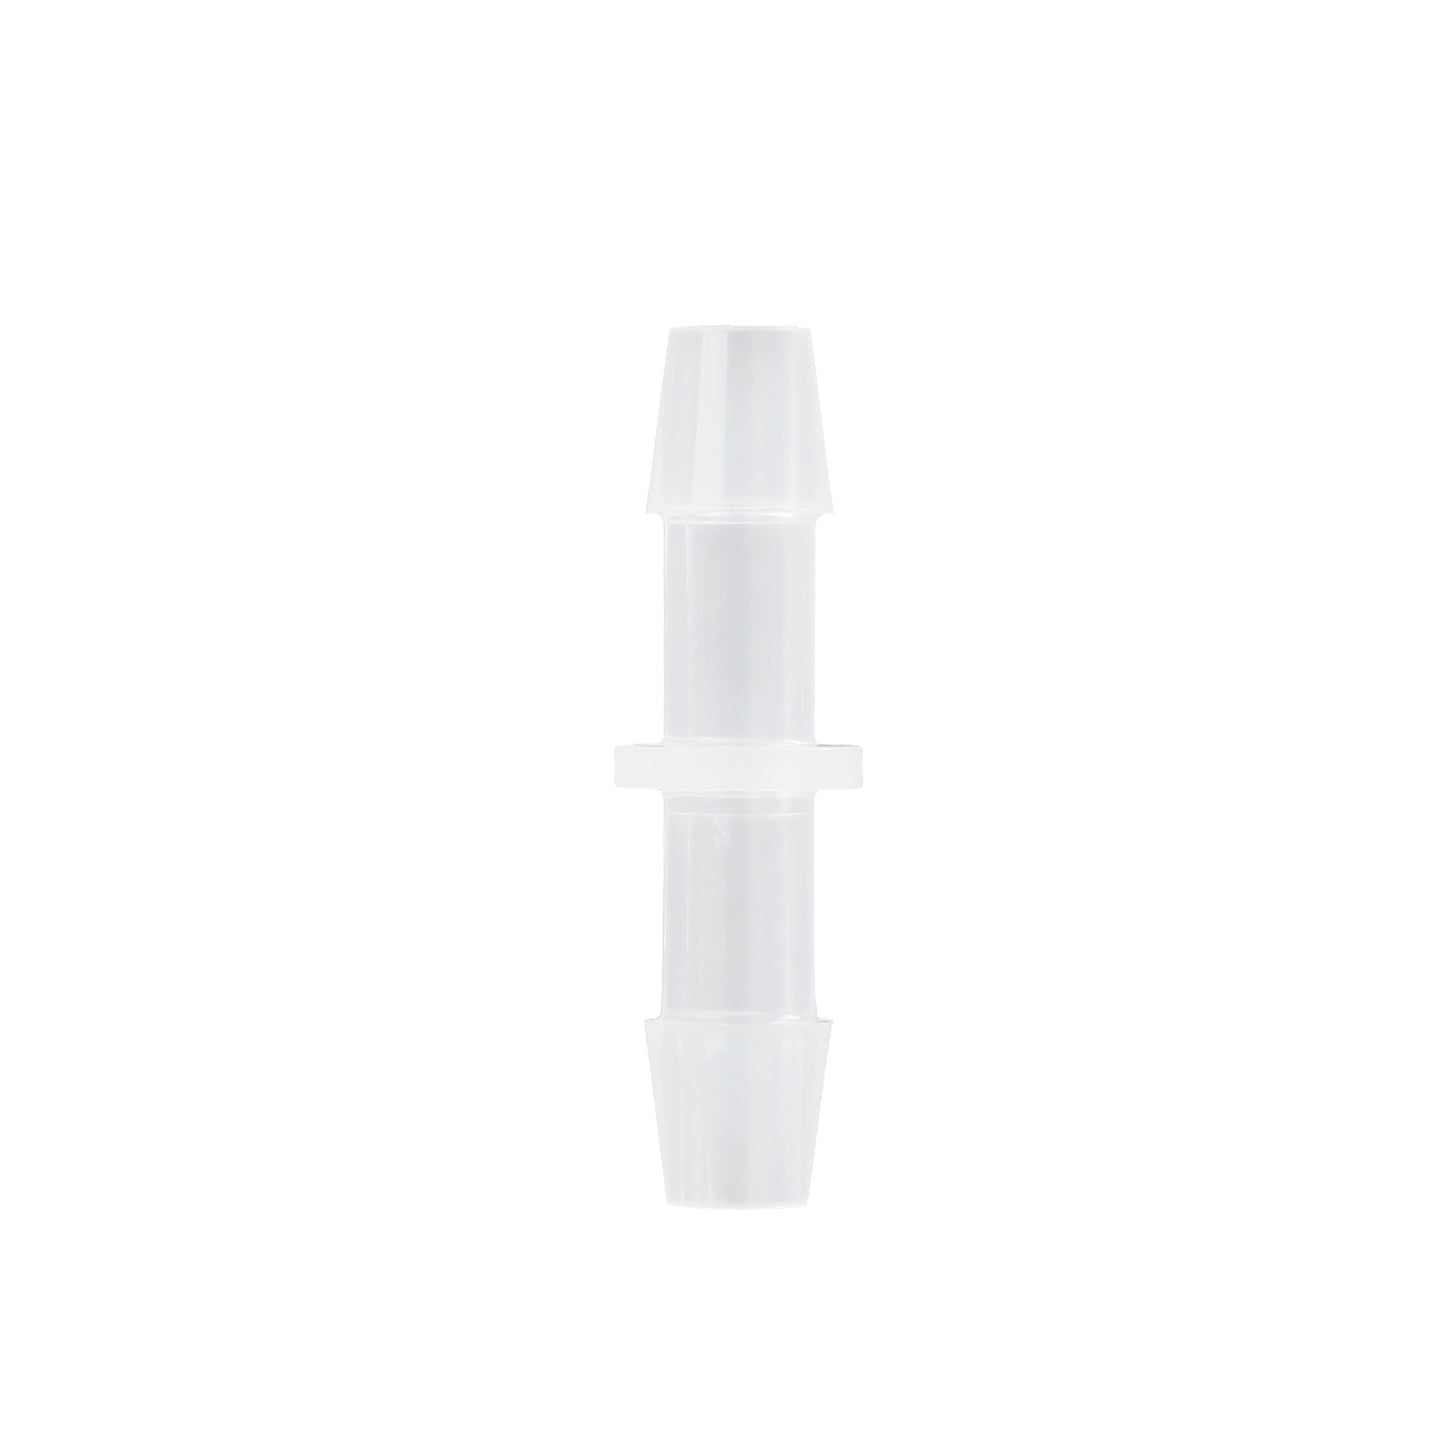 COBETTER Straight Hose Barb Fittings Equal Barbed Pharmaceutical Polypropylene Through Tube Fitting Connector 10/pk